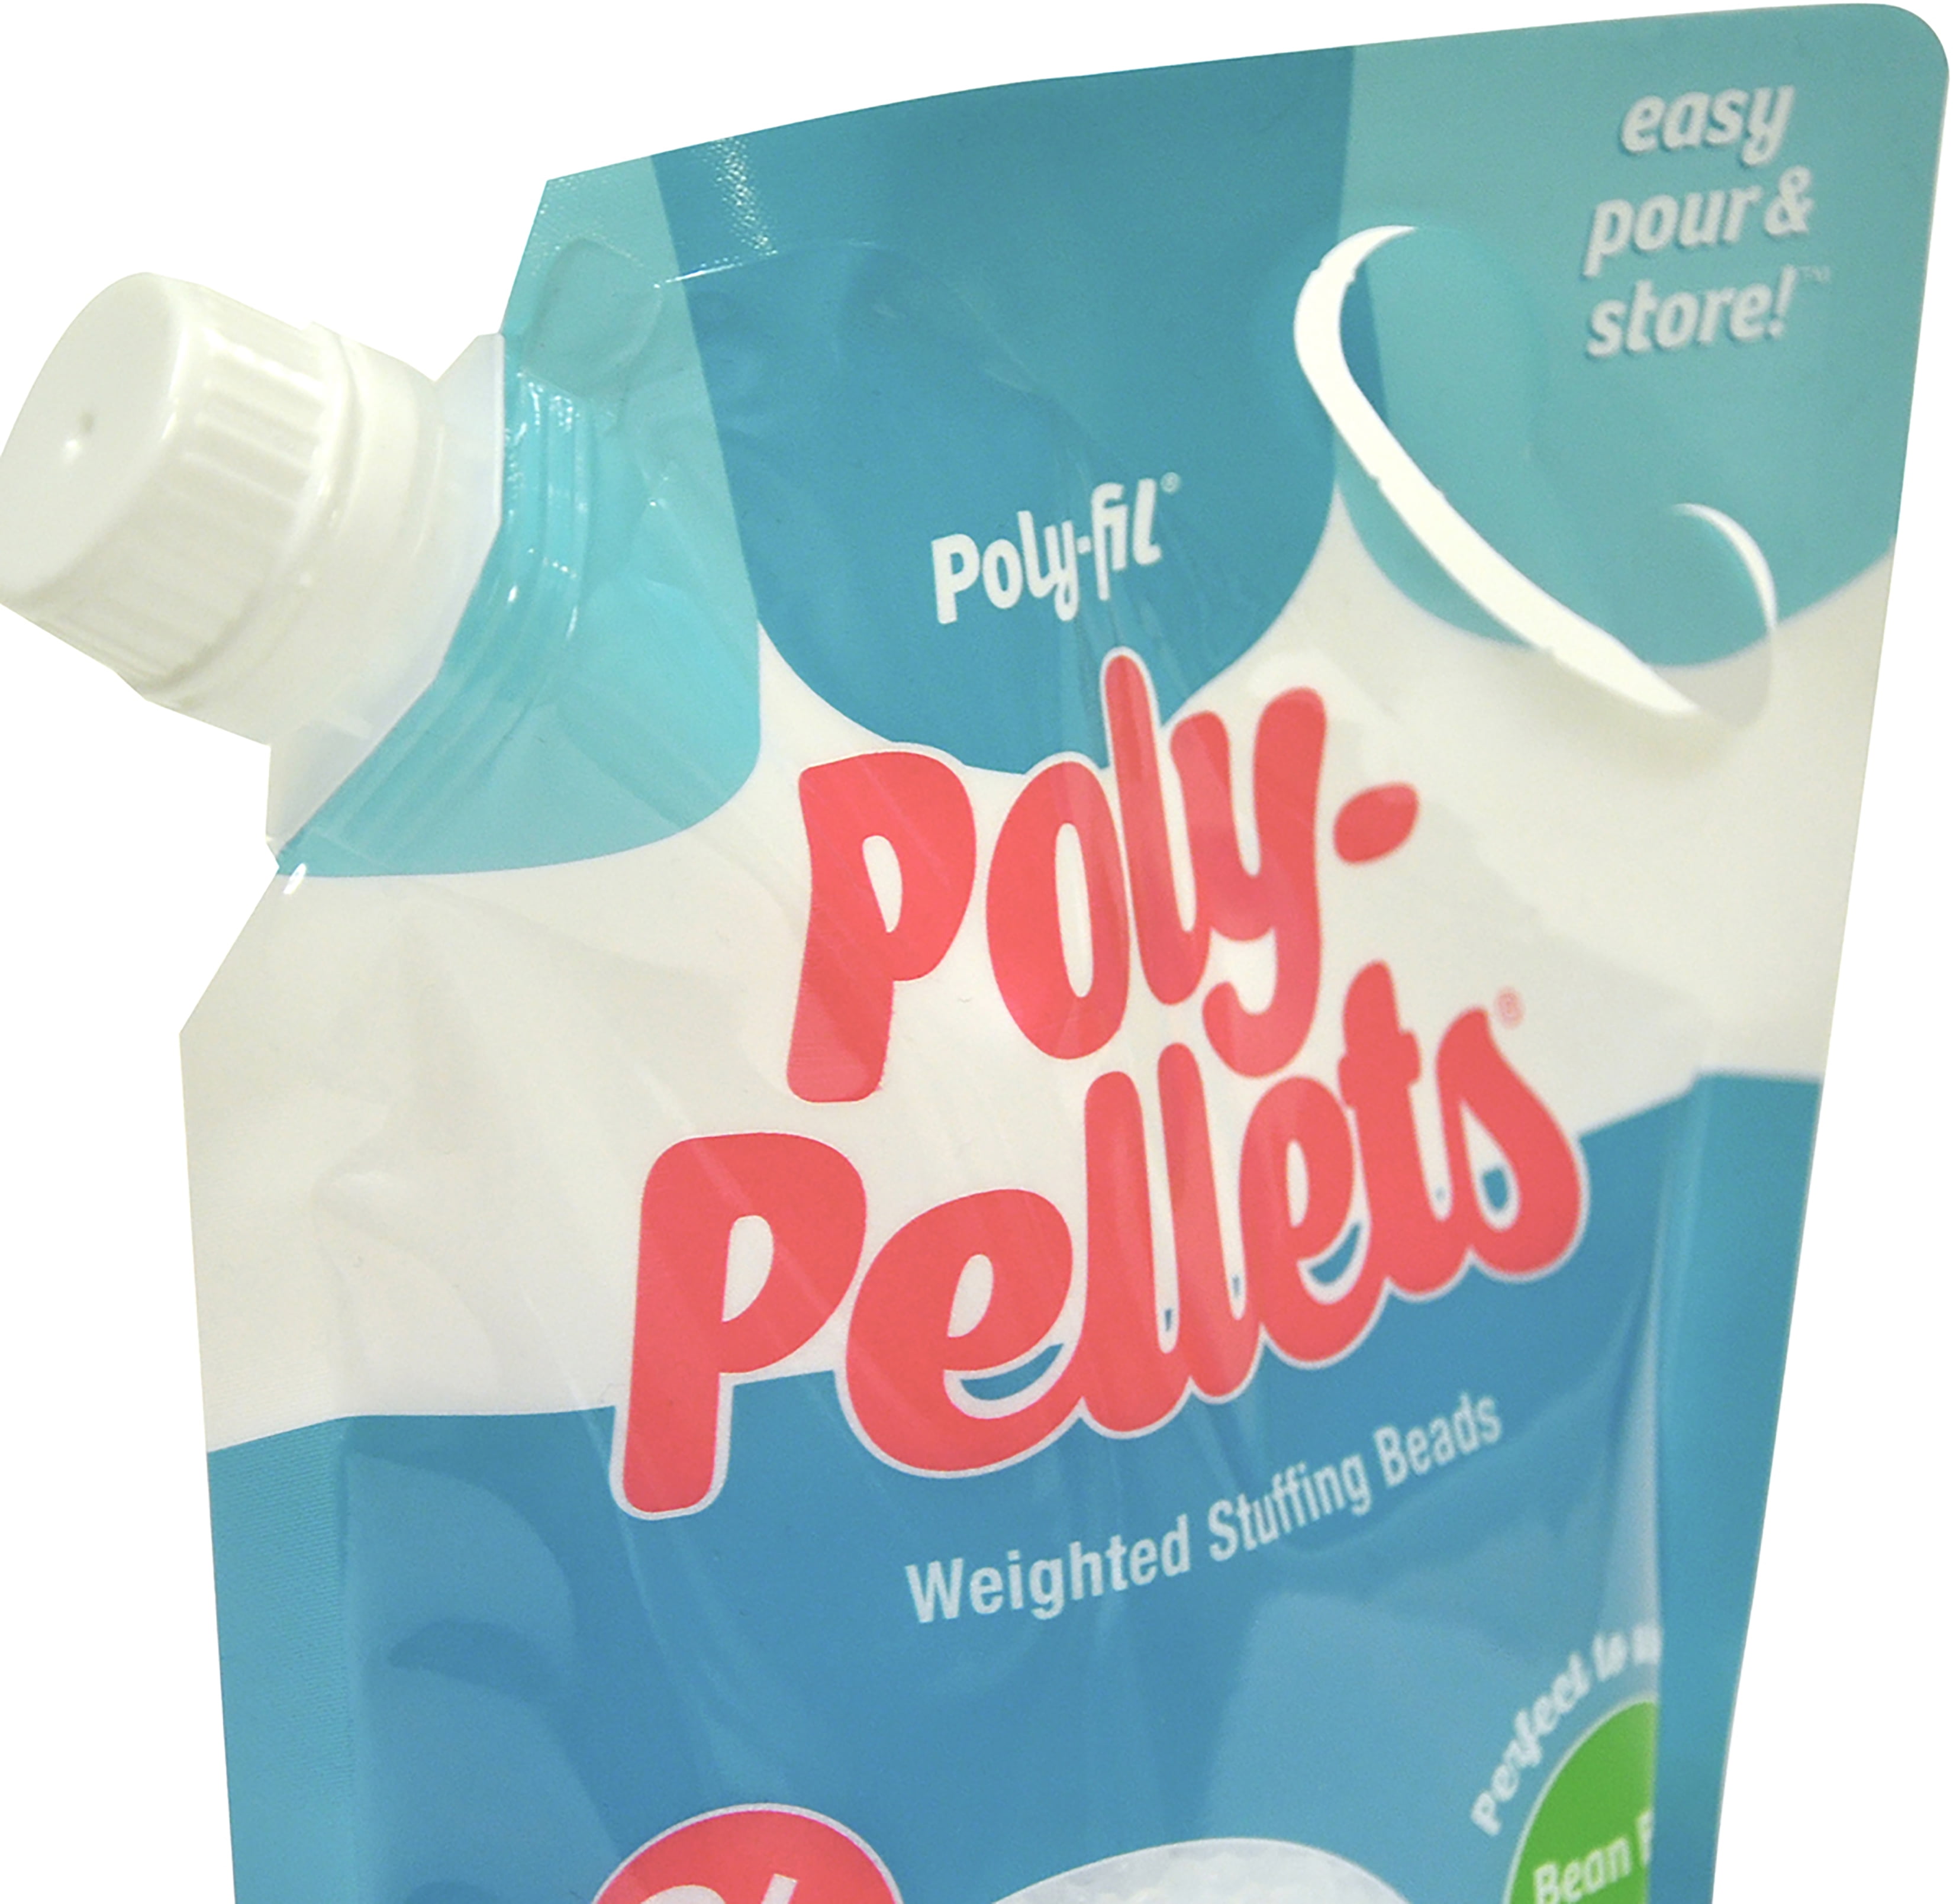 Poly-Fil Poly-Pellets Weighted Stuffing Beads Crafts 32oz 907g NEW + Extra  – St. John's Institute (Hua Ming)